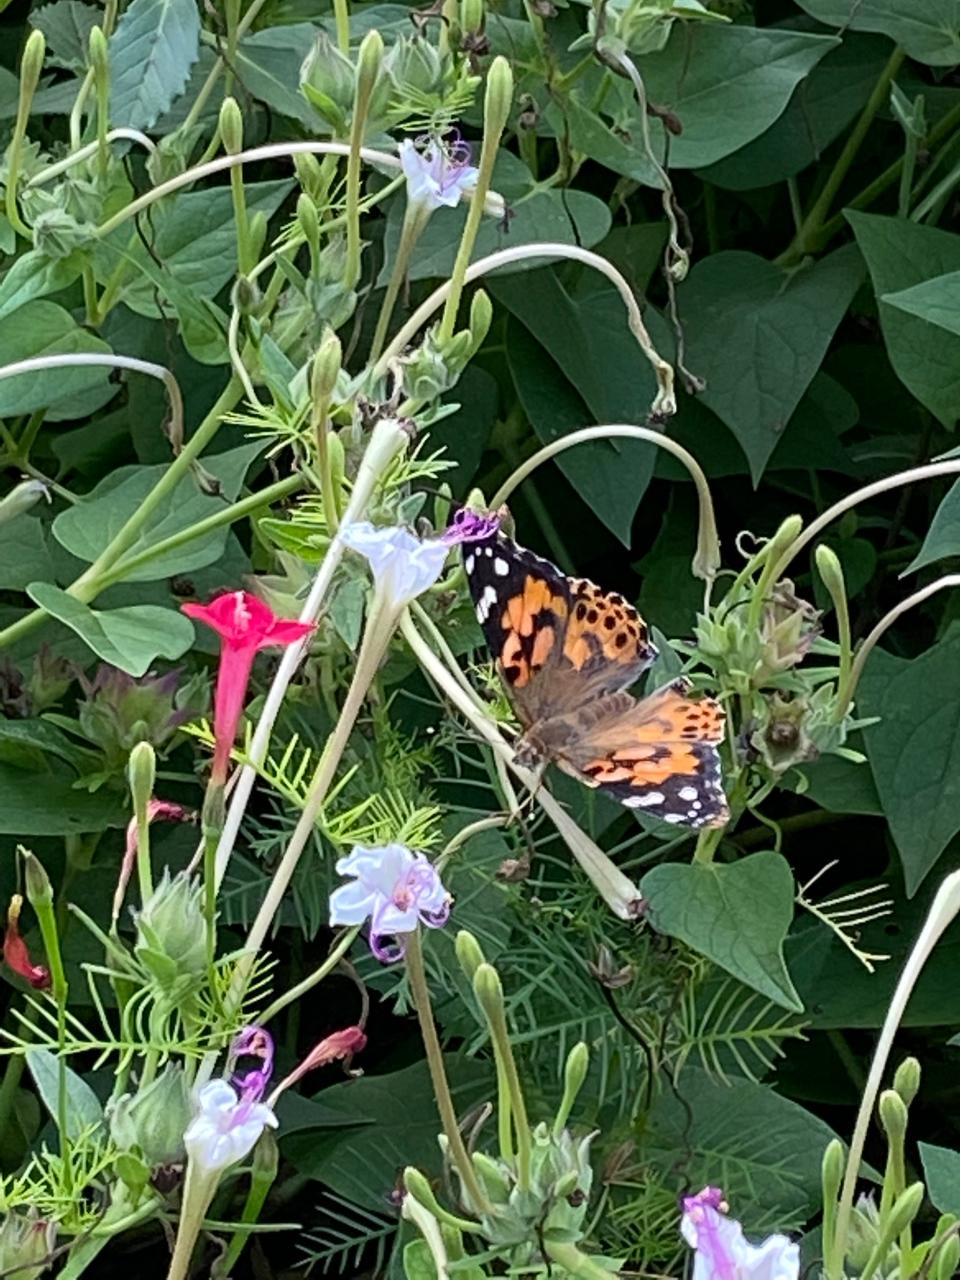 The Amarillo Botanical Gardens invites the community to experience "A Day with the Butterflies," an expansion of their annual breakfast event, scheduled to include the traditional breakfast, and butterfly releases as well as live music, food trucks, vendors, arts and crafts, educational demonstrations and much more this Saturday at the gardens.